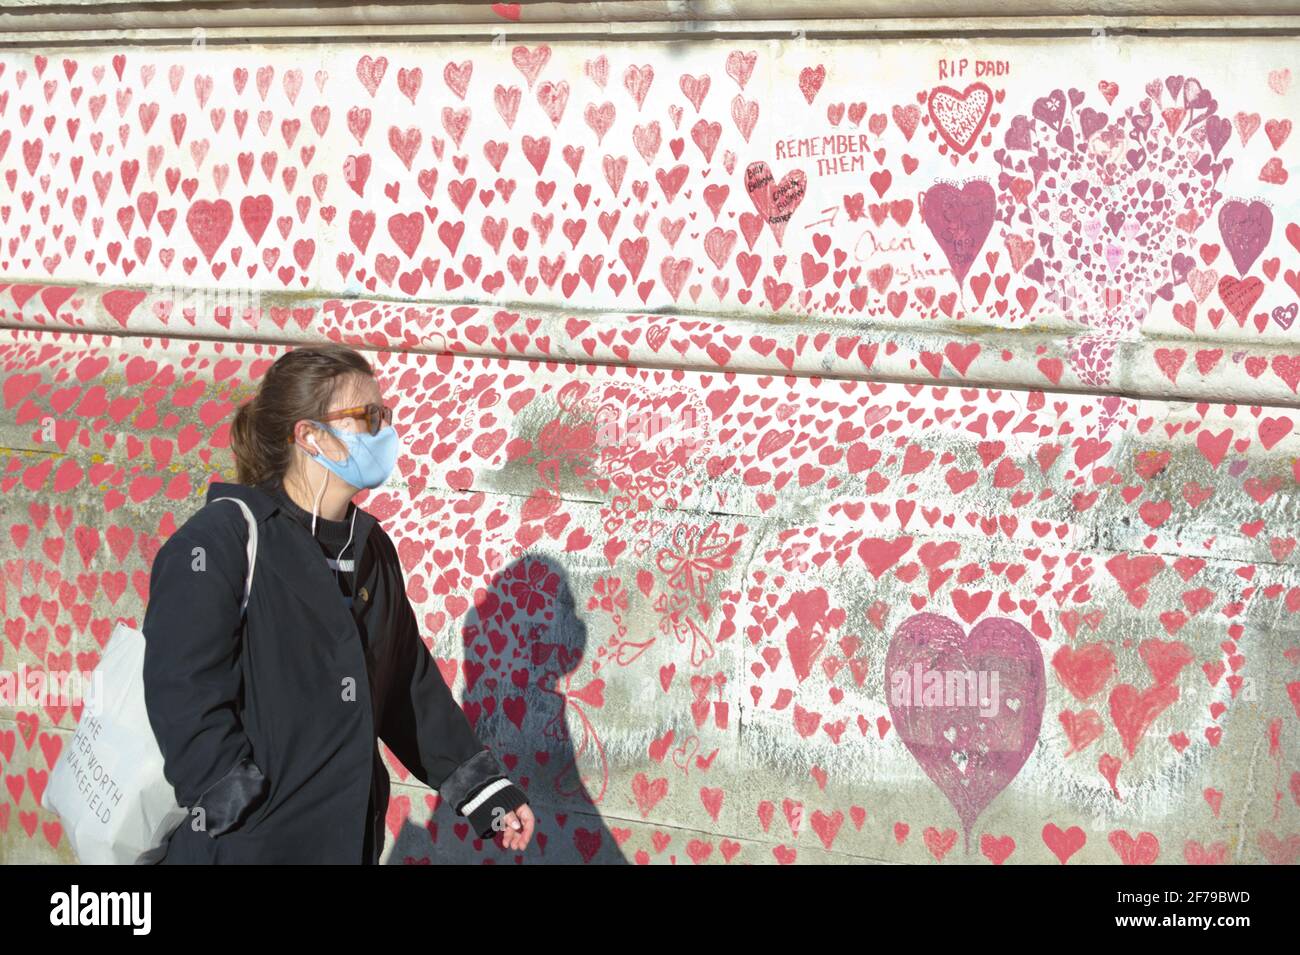 The national Covid Memorial Wall next to the Thames in London. Red hearts of been painted on the wall as a tribute to the victims of the virus. Stock Photo